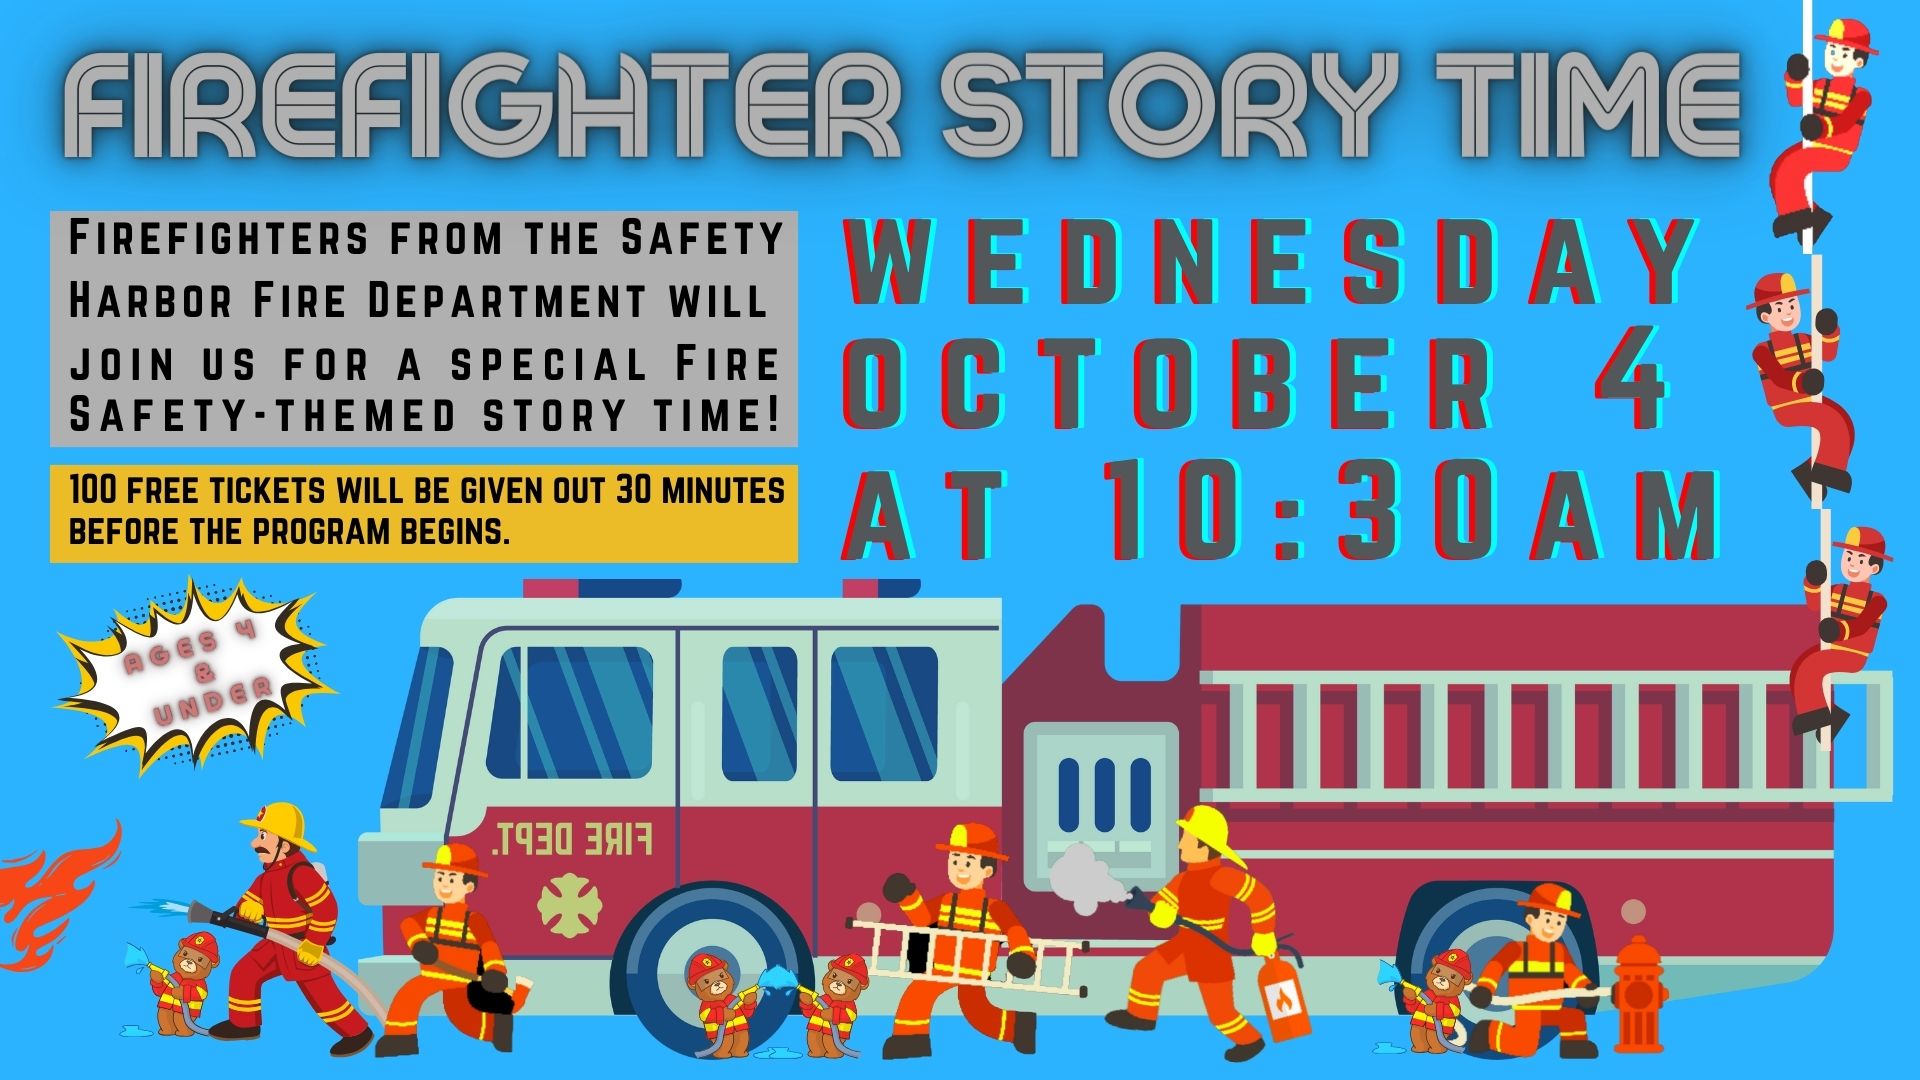 Firefighter story time